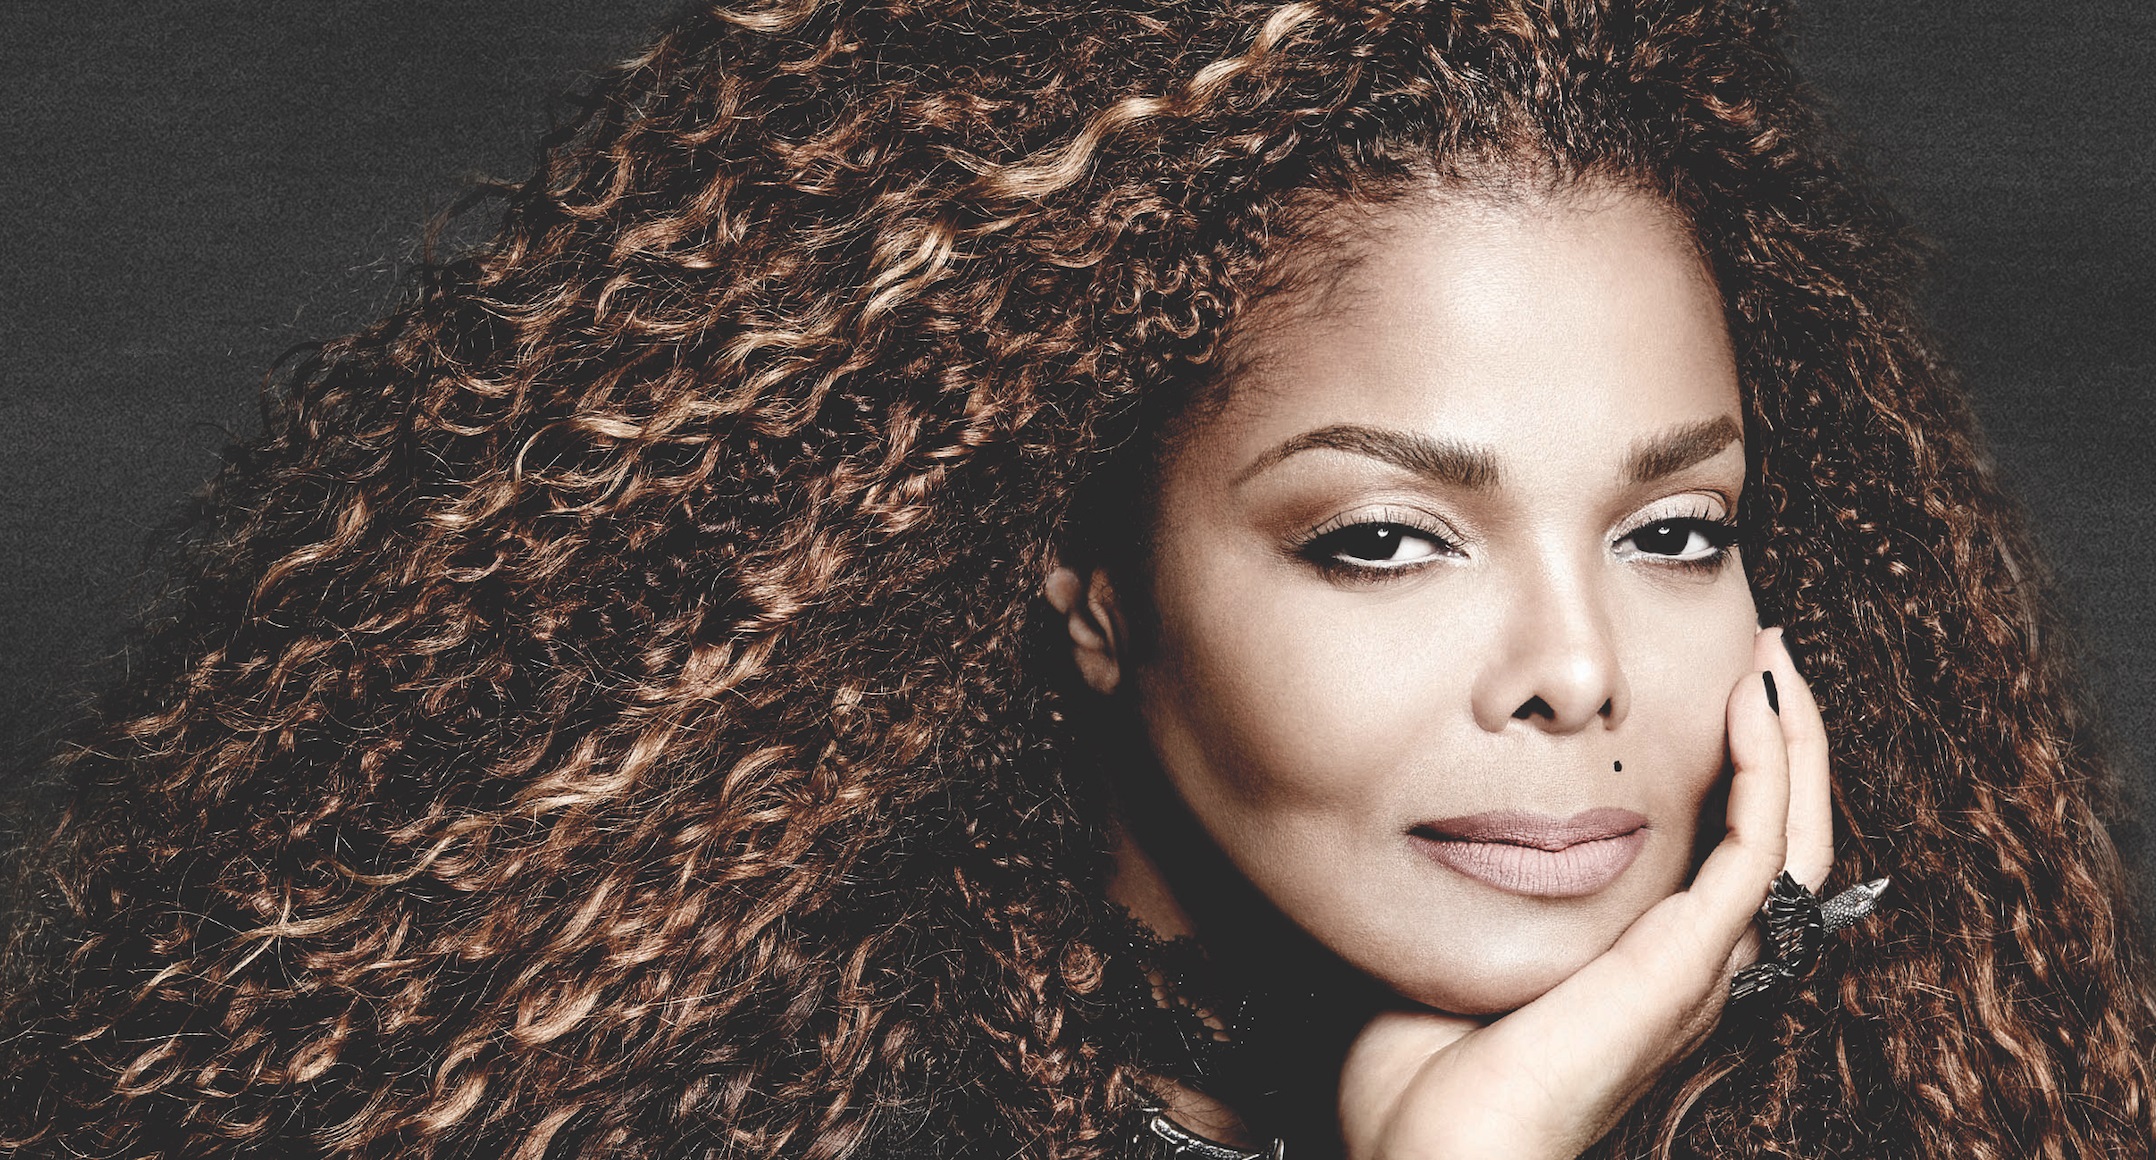 Janet Jackson Announces Comeback With ‘Together Again Tour’ Which Will Feature NEW Music From Her